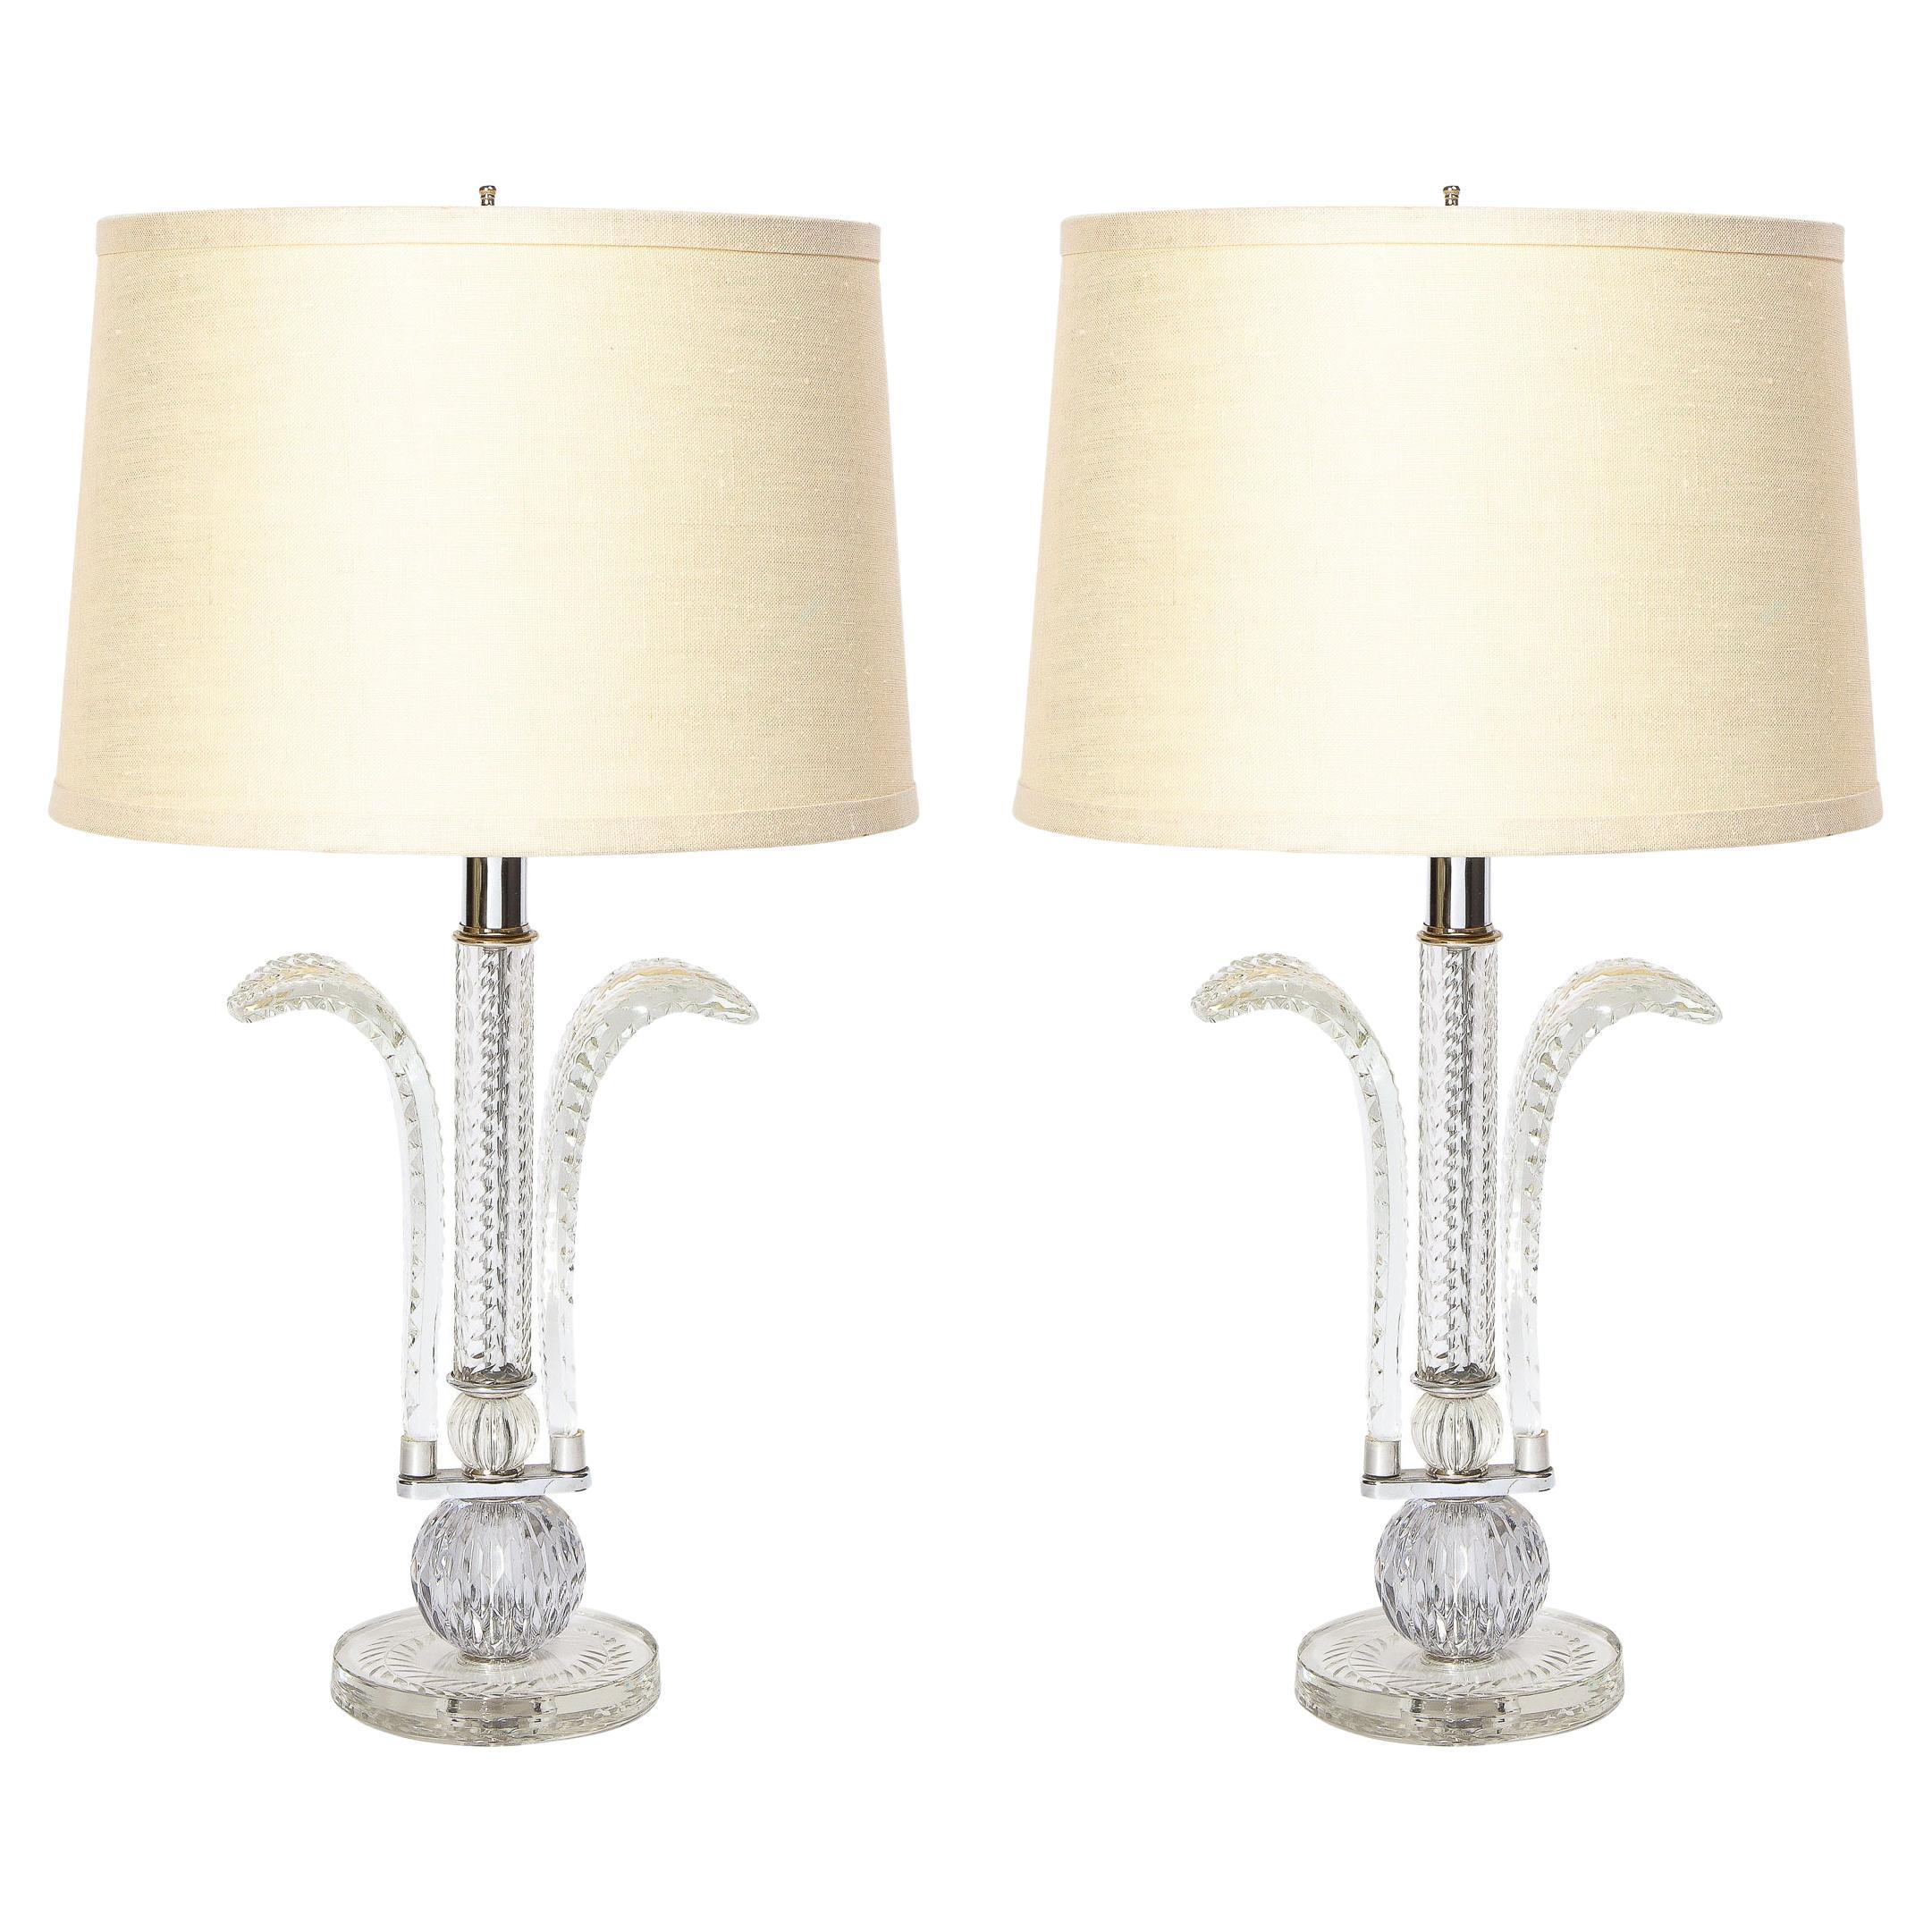 Pair of 1940s Hollywood Regency Translucent Cut Crystal Plume Form Table Lamps